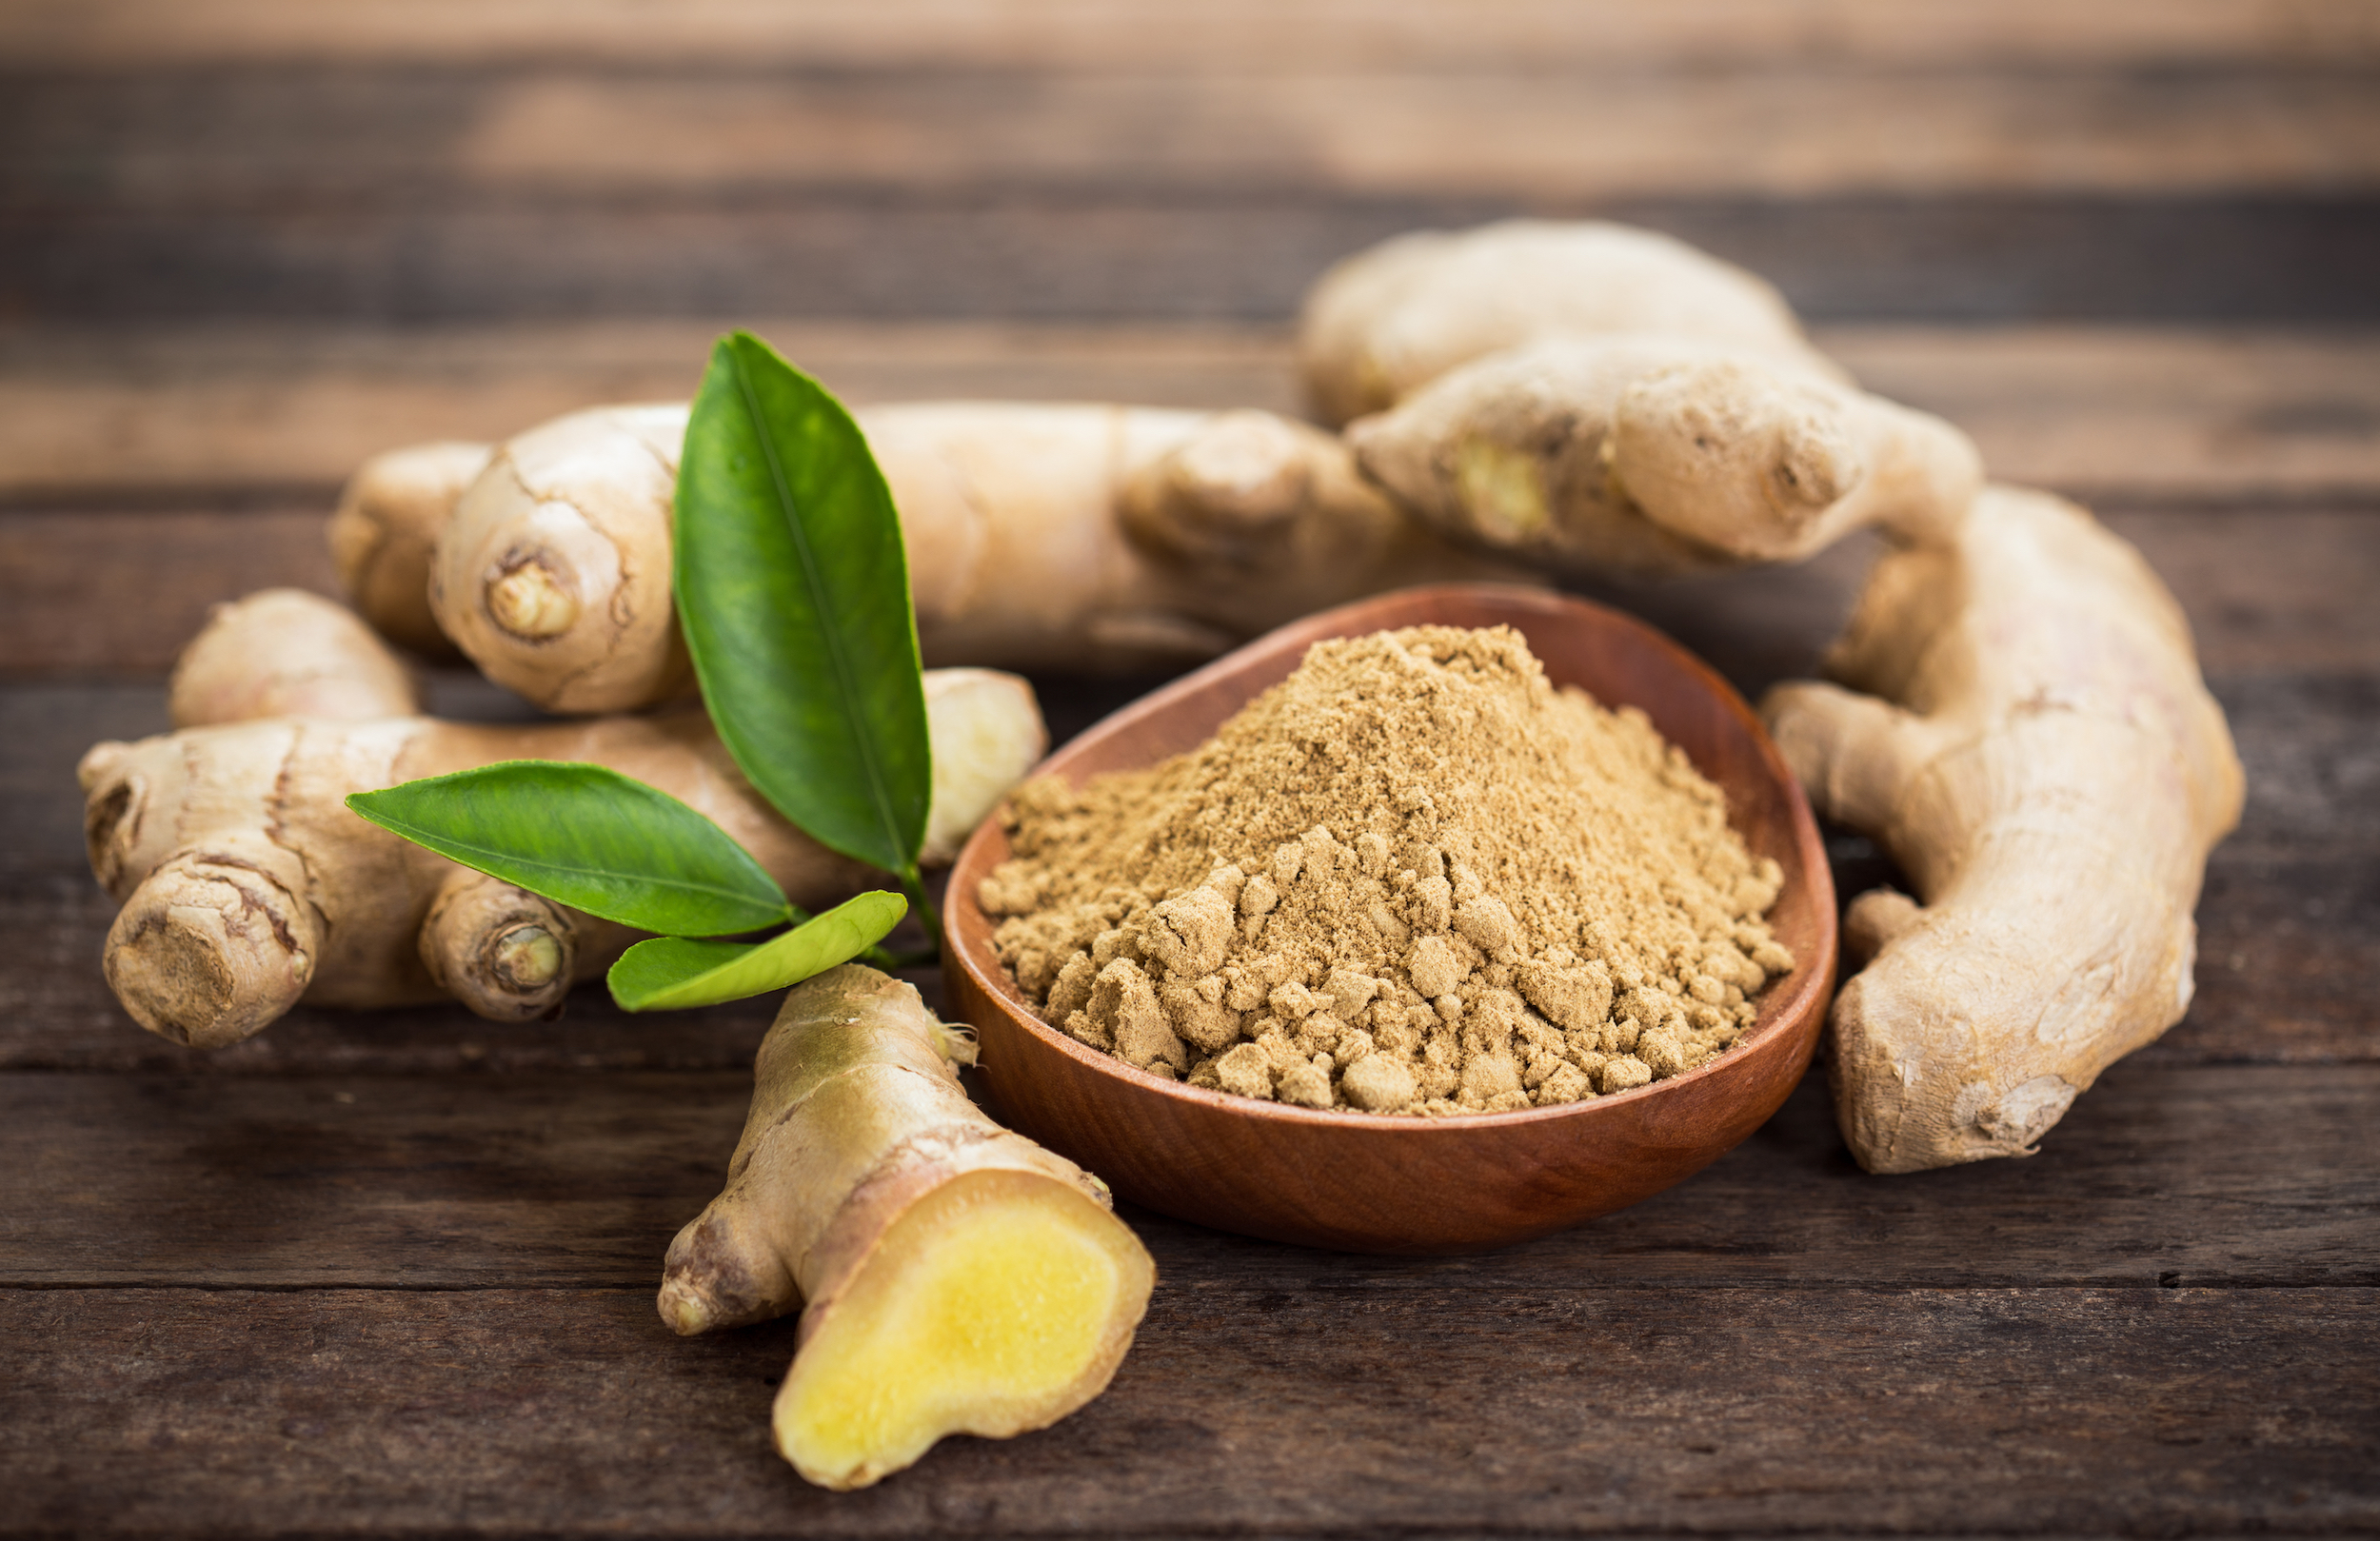  Grow ginger from a store-bought root in 6 easy steps